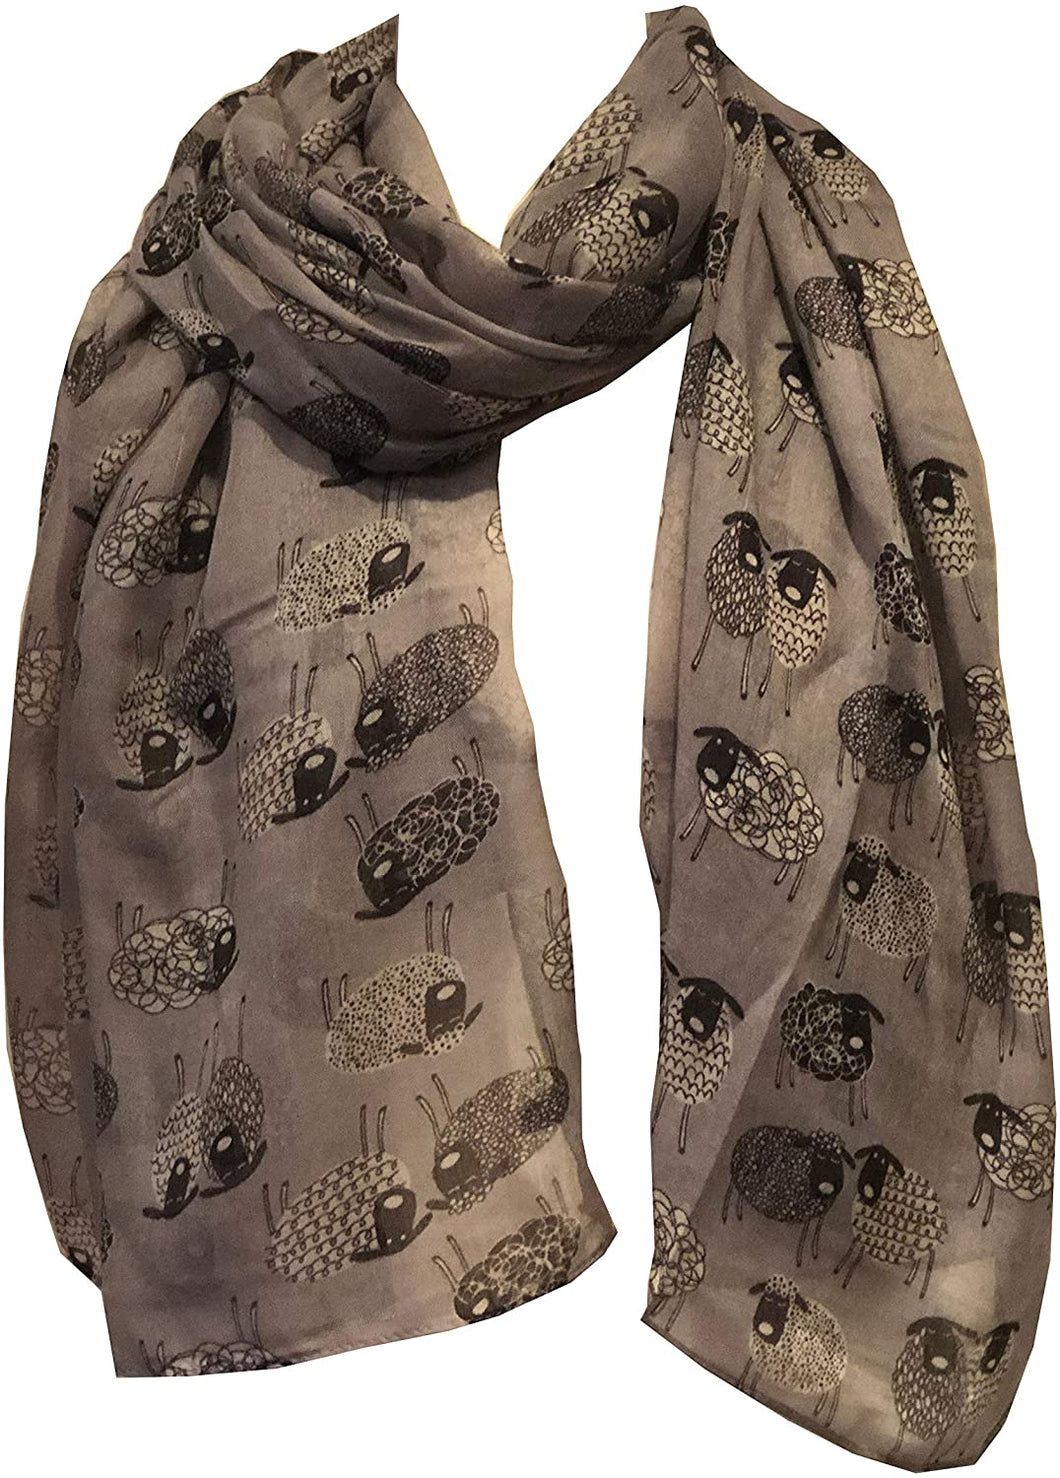 Pamper Yourself Now Grey Sketched Sheep Design Long Scarf, Soft Ladies Fashion London